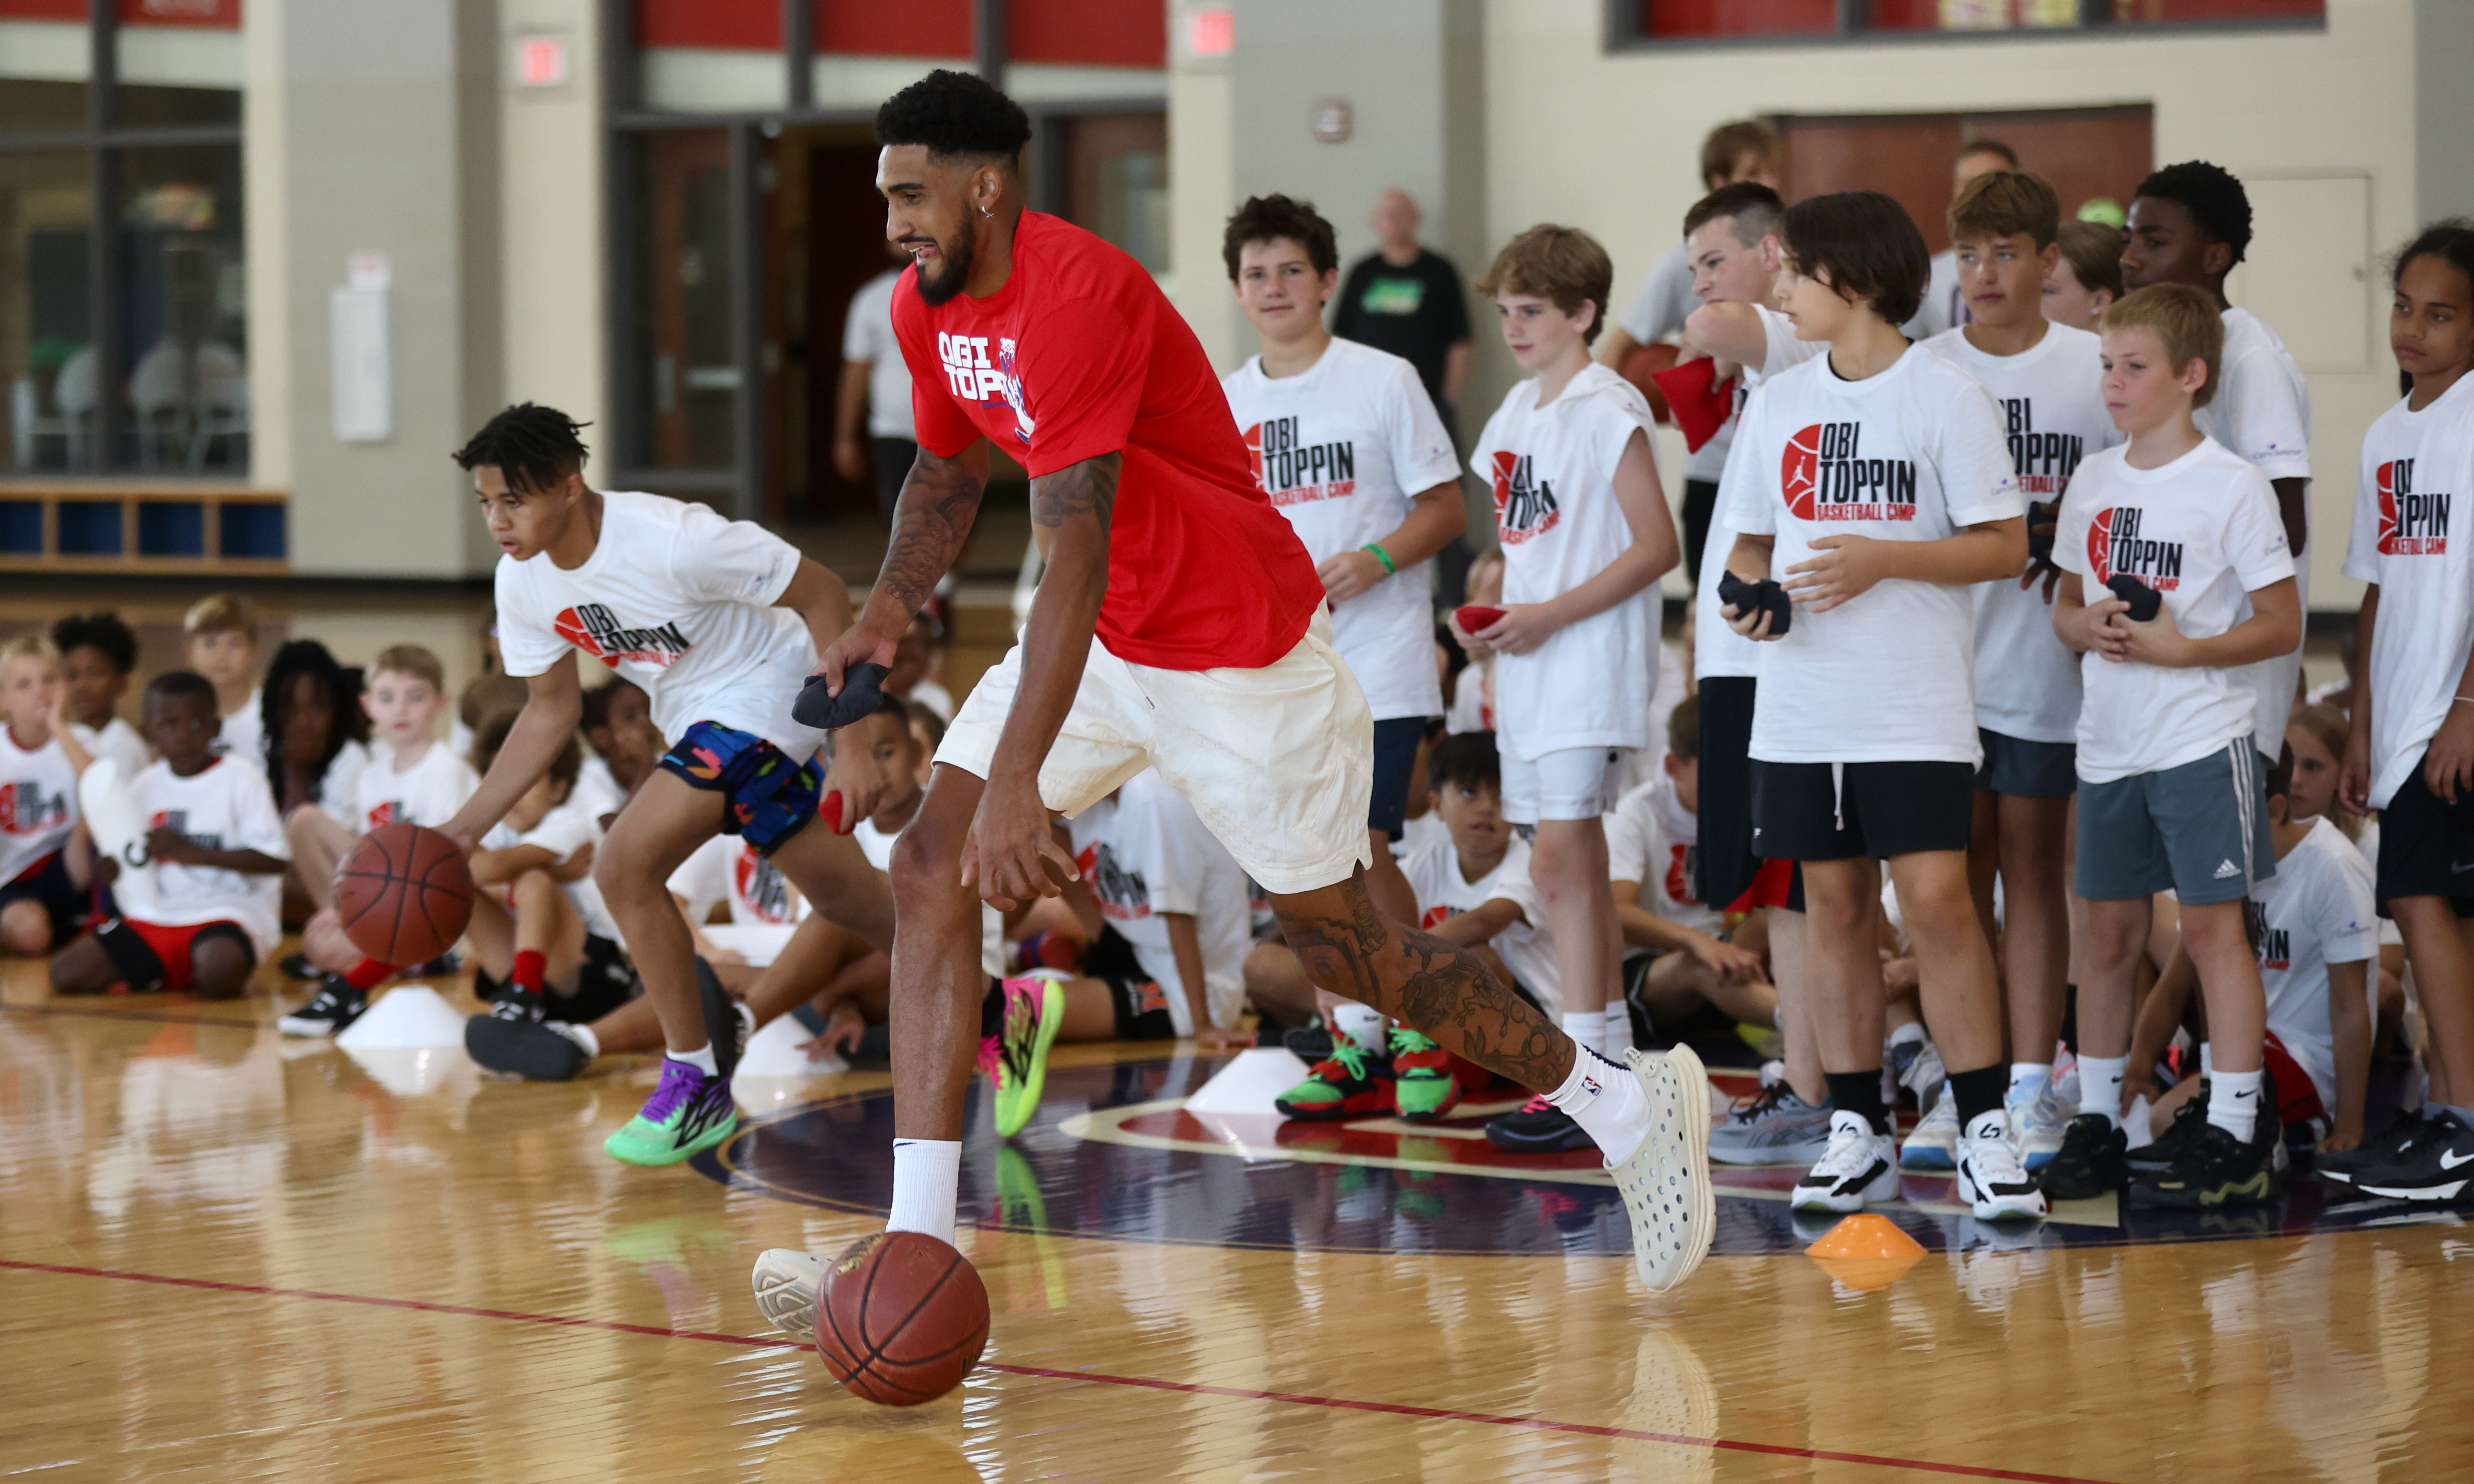 Obi Toppin to host youth basketball camp in Dayton